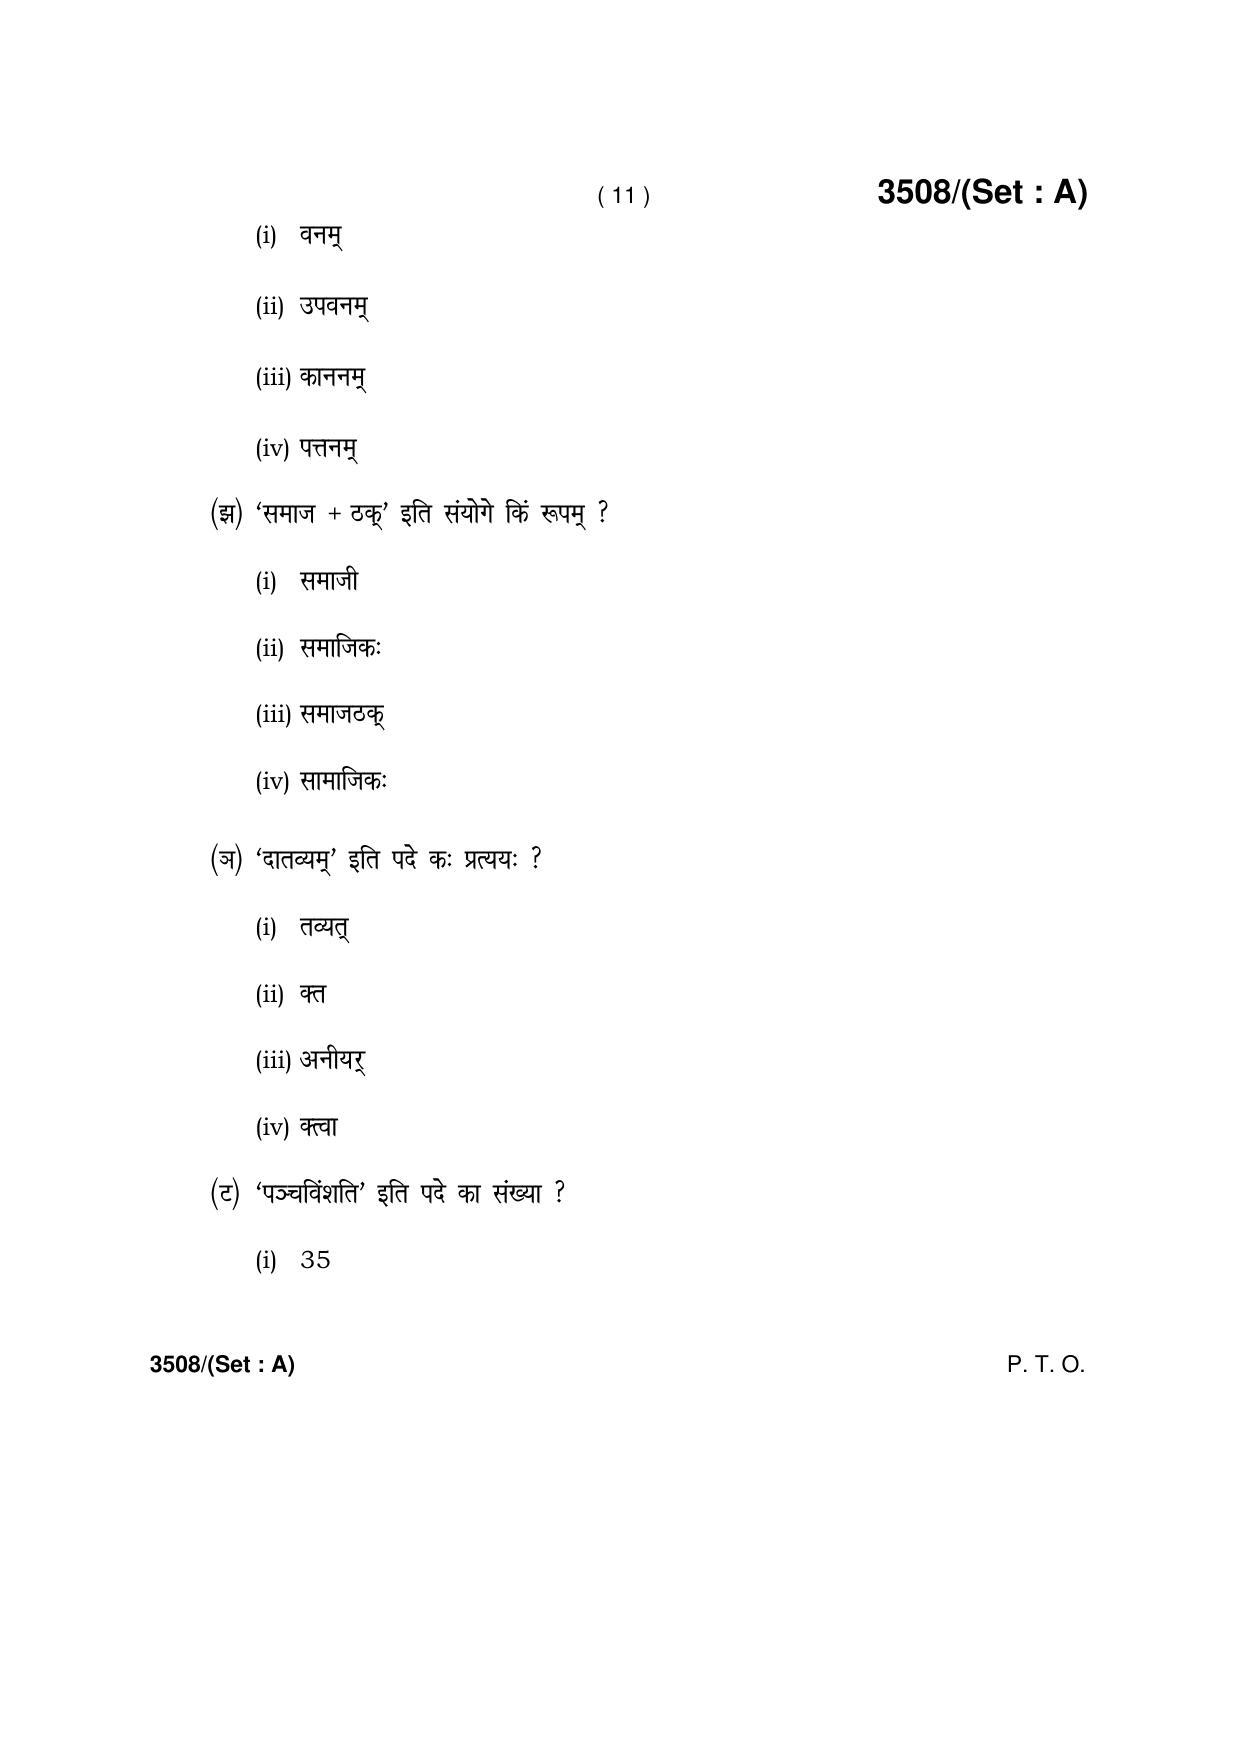 Haryana Board HBSE Class 10 Sanskrit -A 2018 Question Paper - Page 11